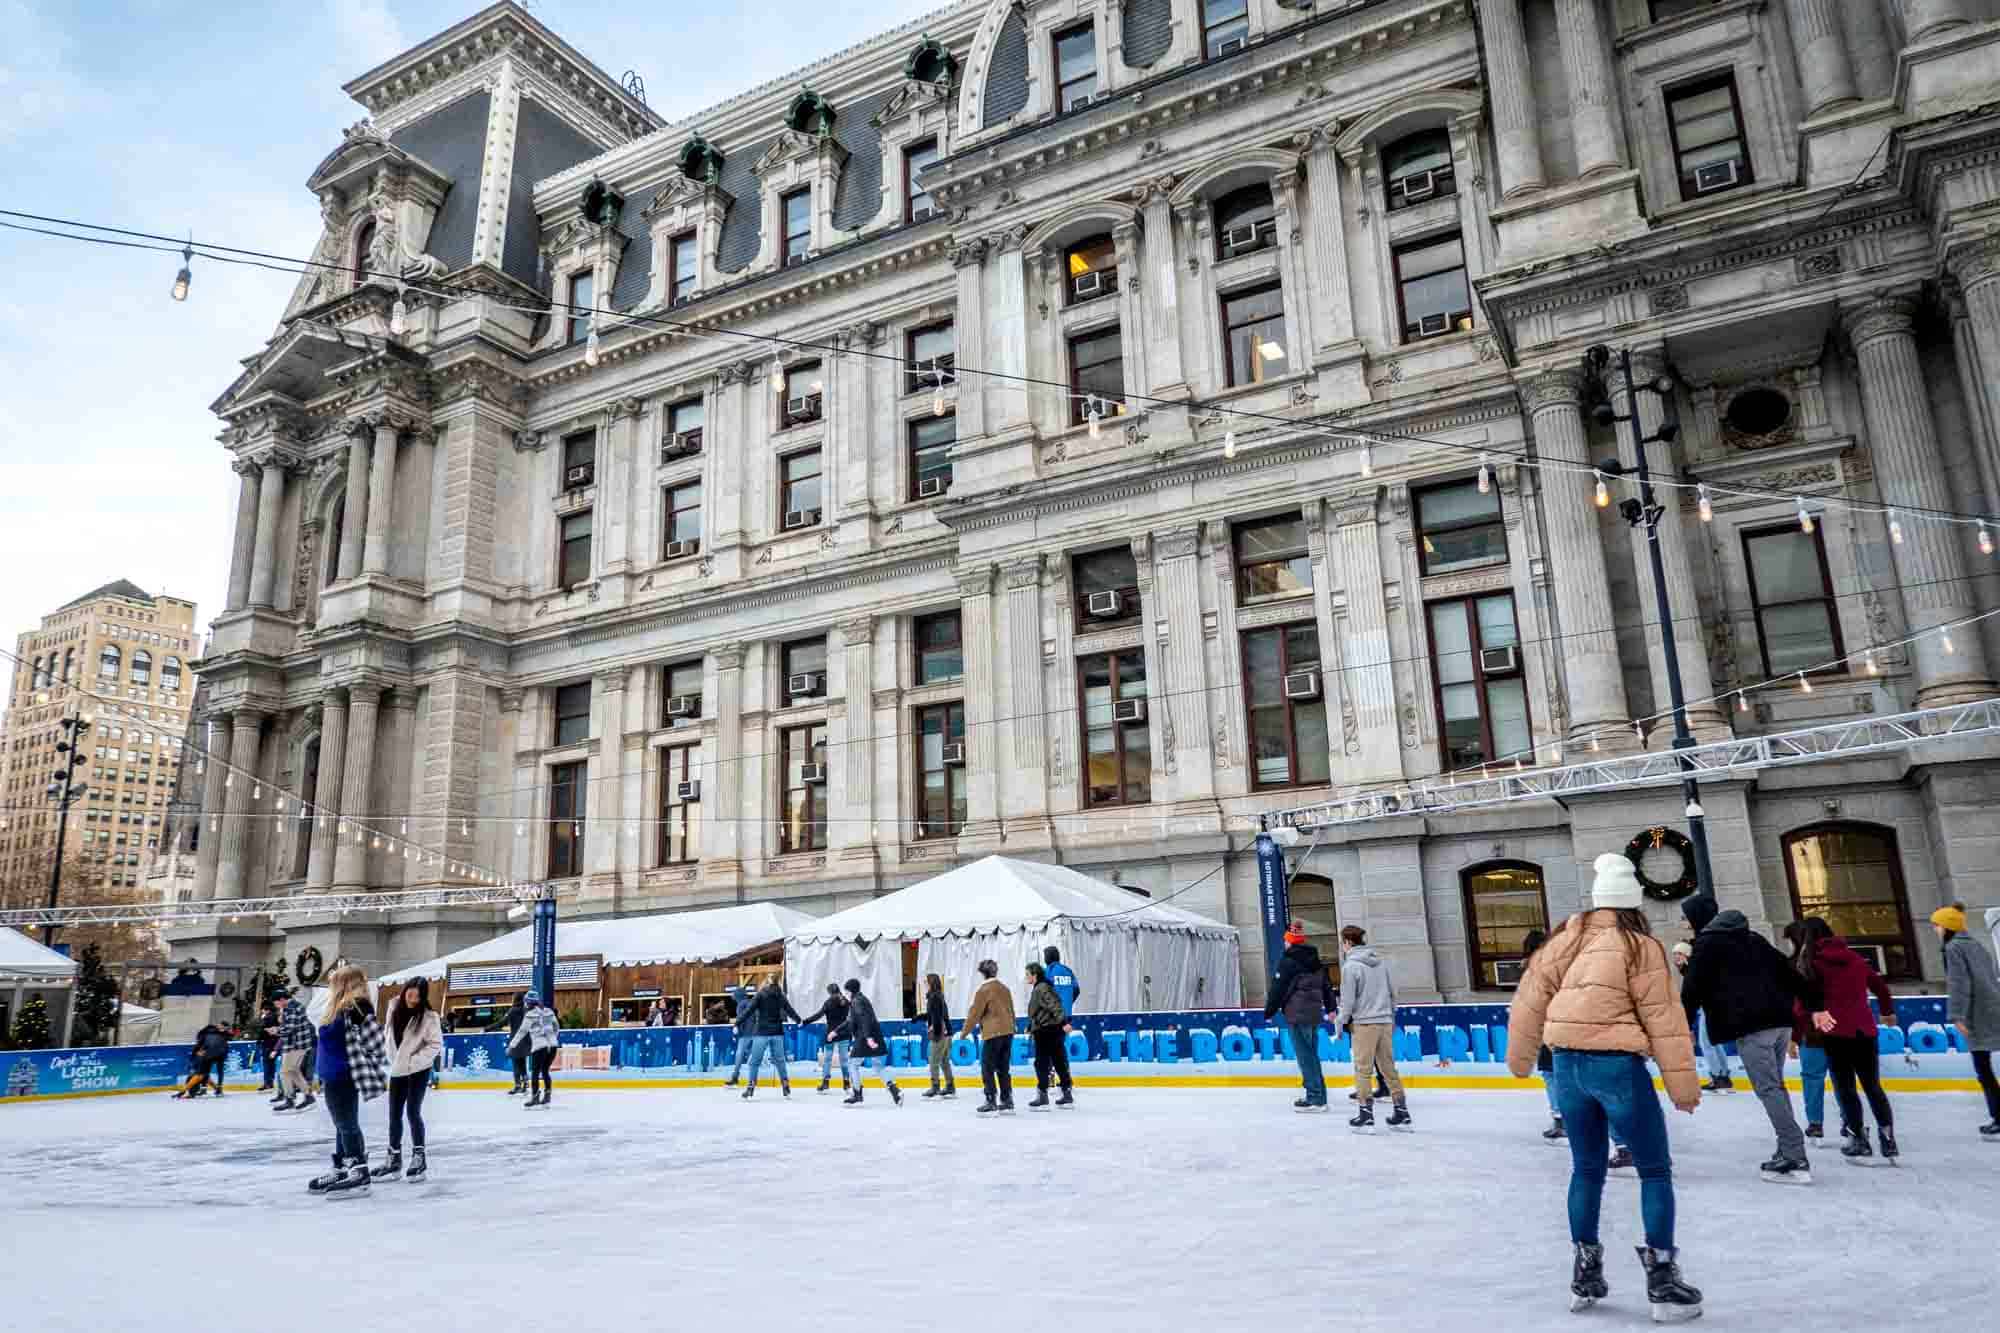 People skating on an ice-skating rink beside a large gray building.